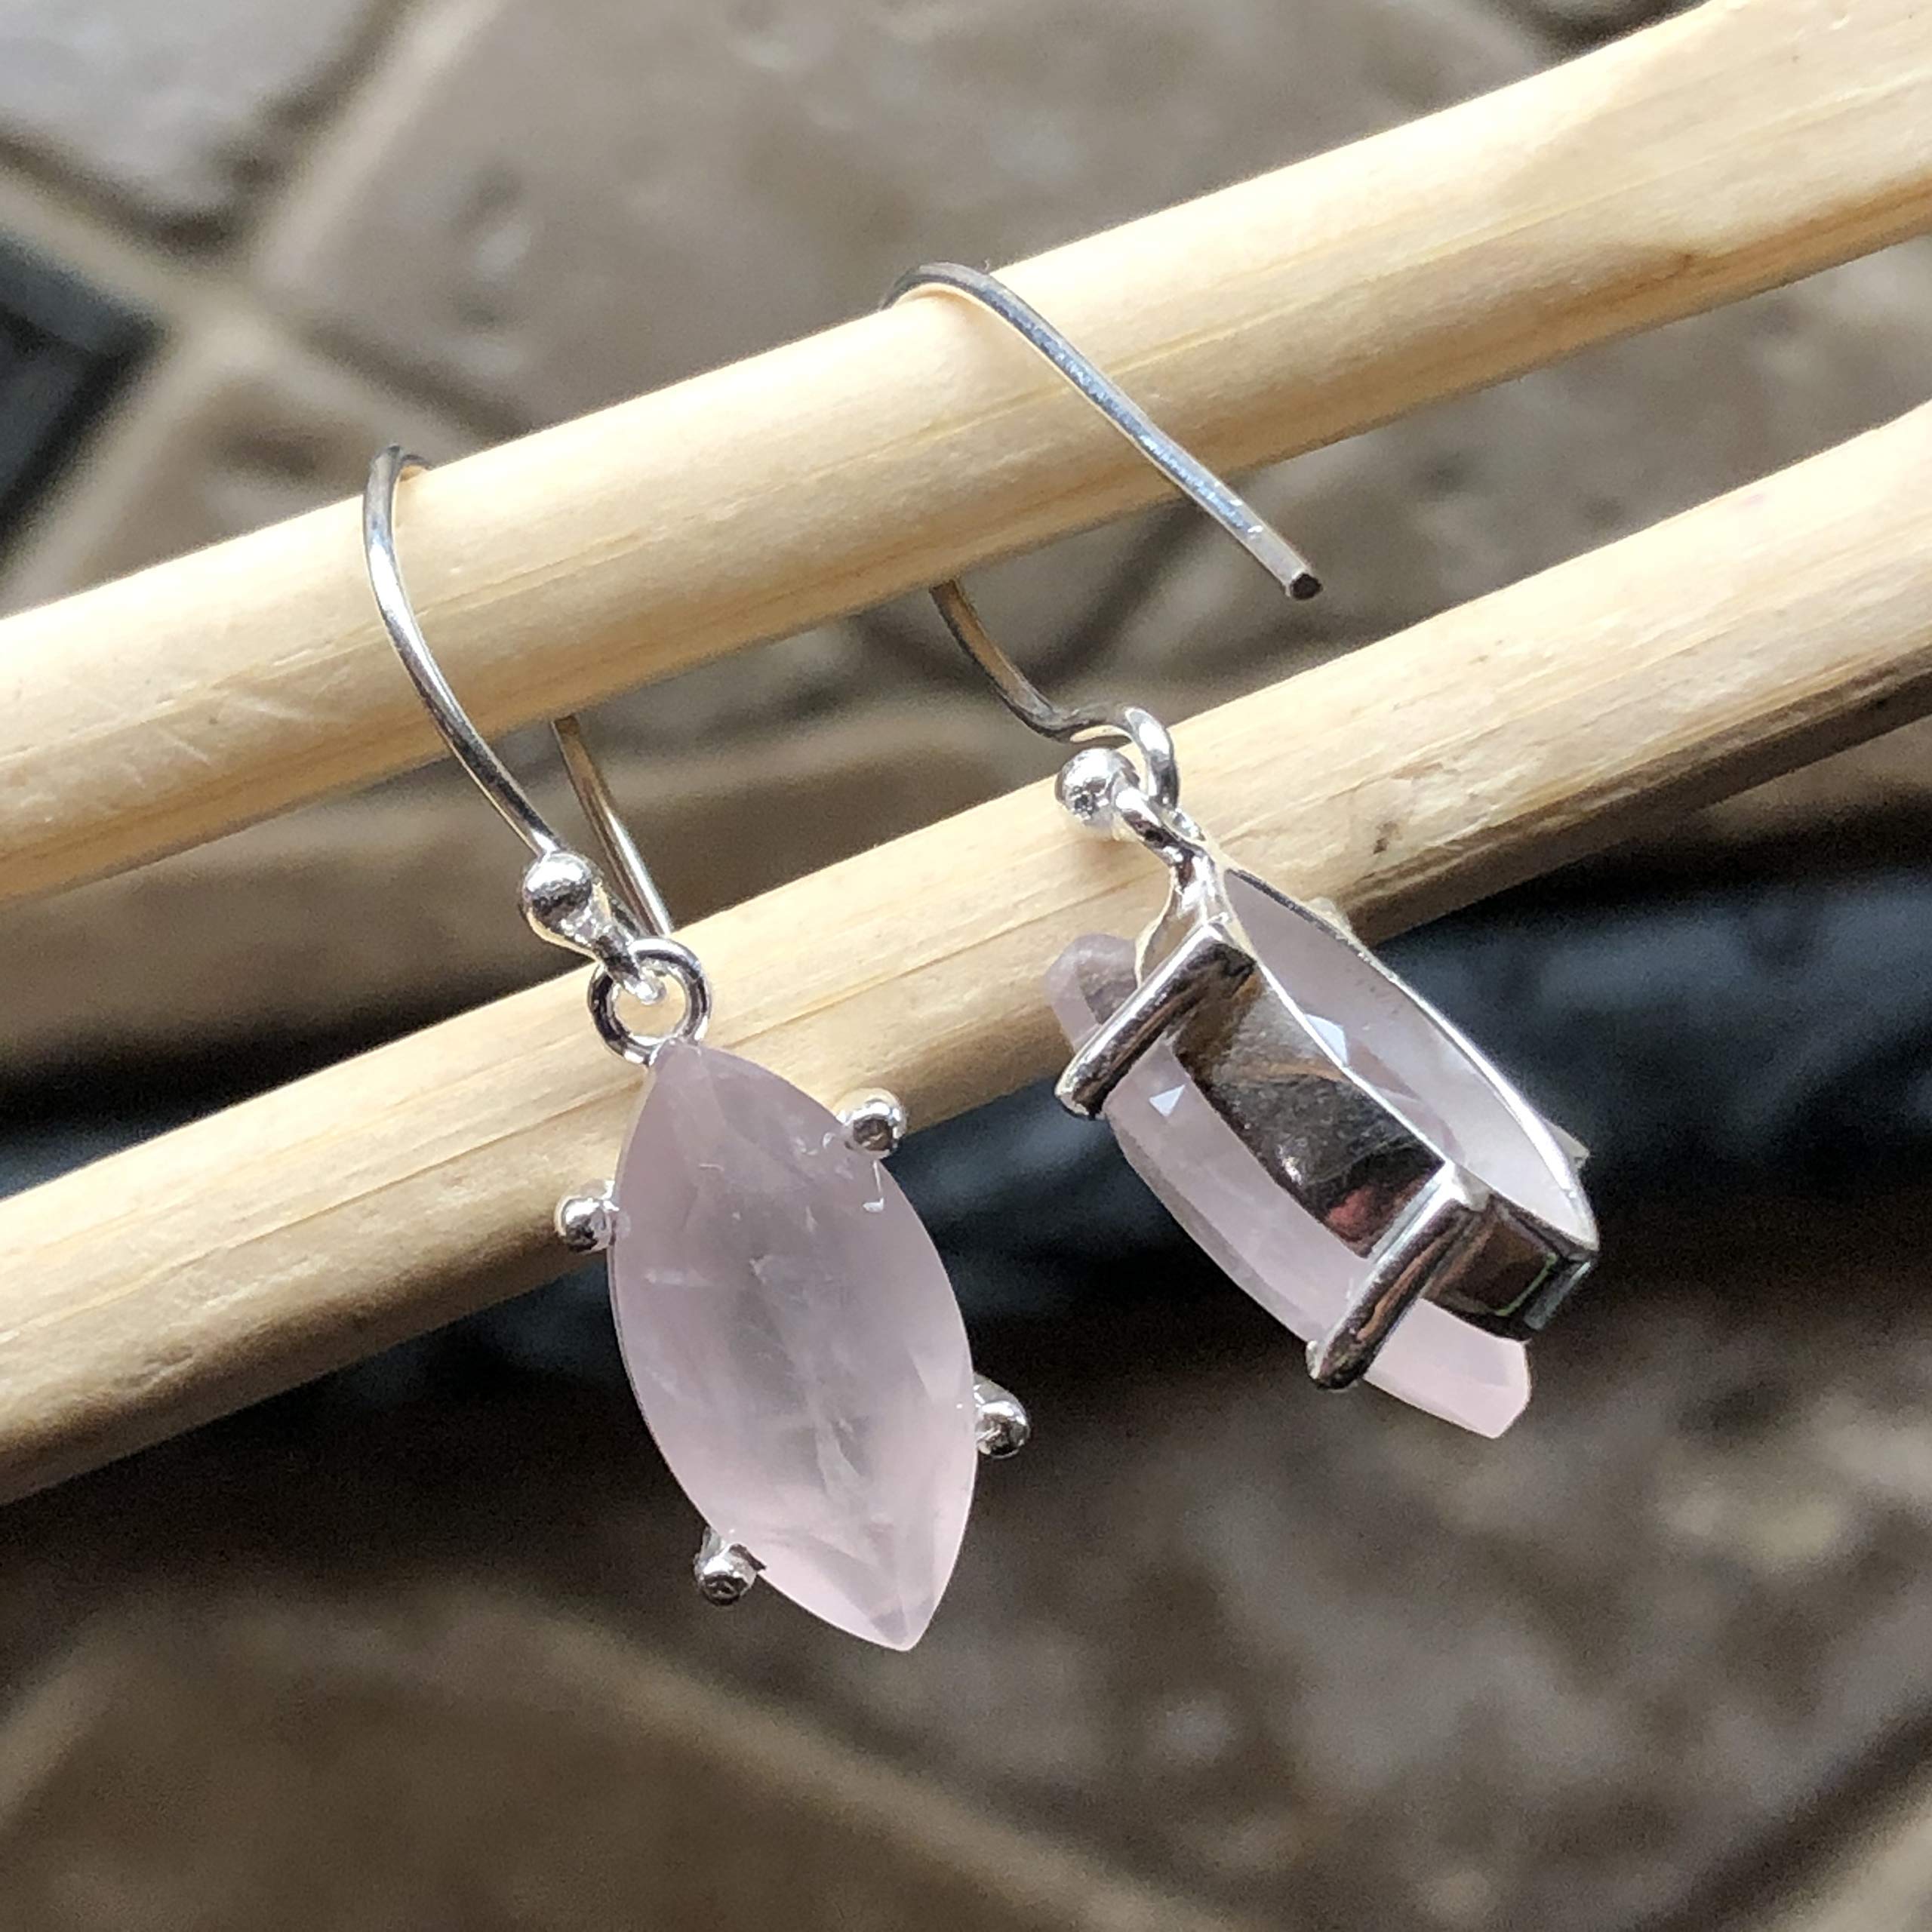 Natural 2ct Pink Rose Quartz 925 Solid Sterling Silver Earrings 25mm - Natural Rocks by Kala